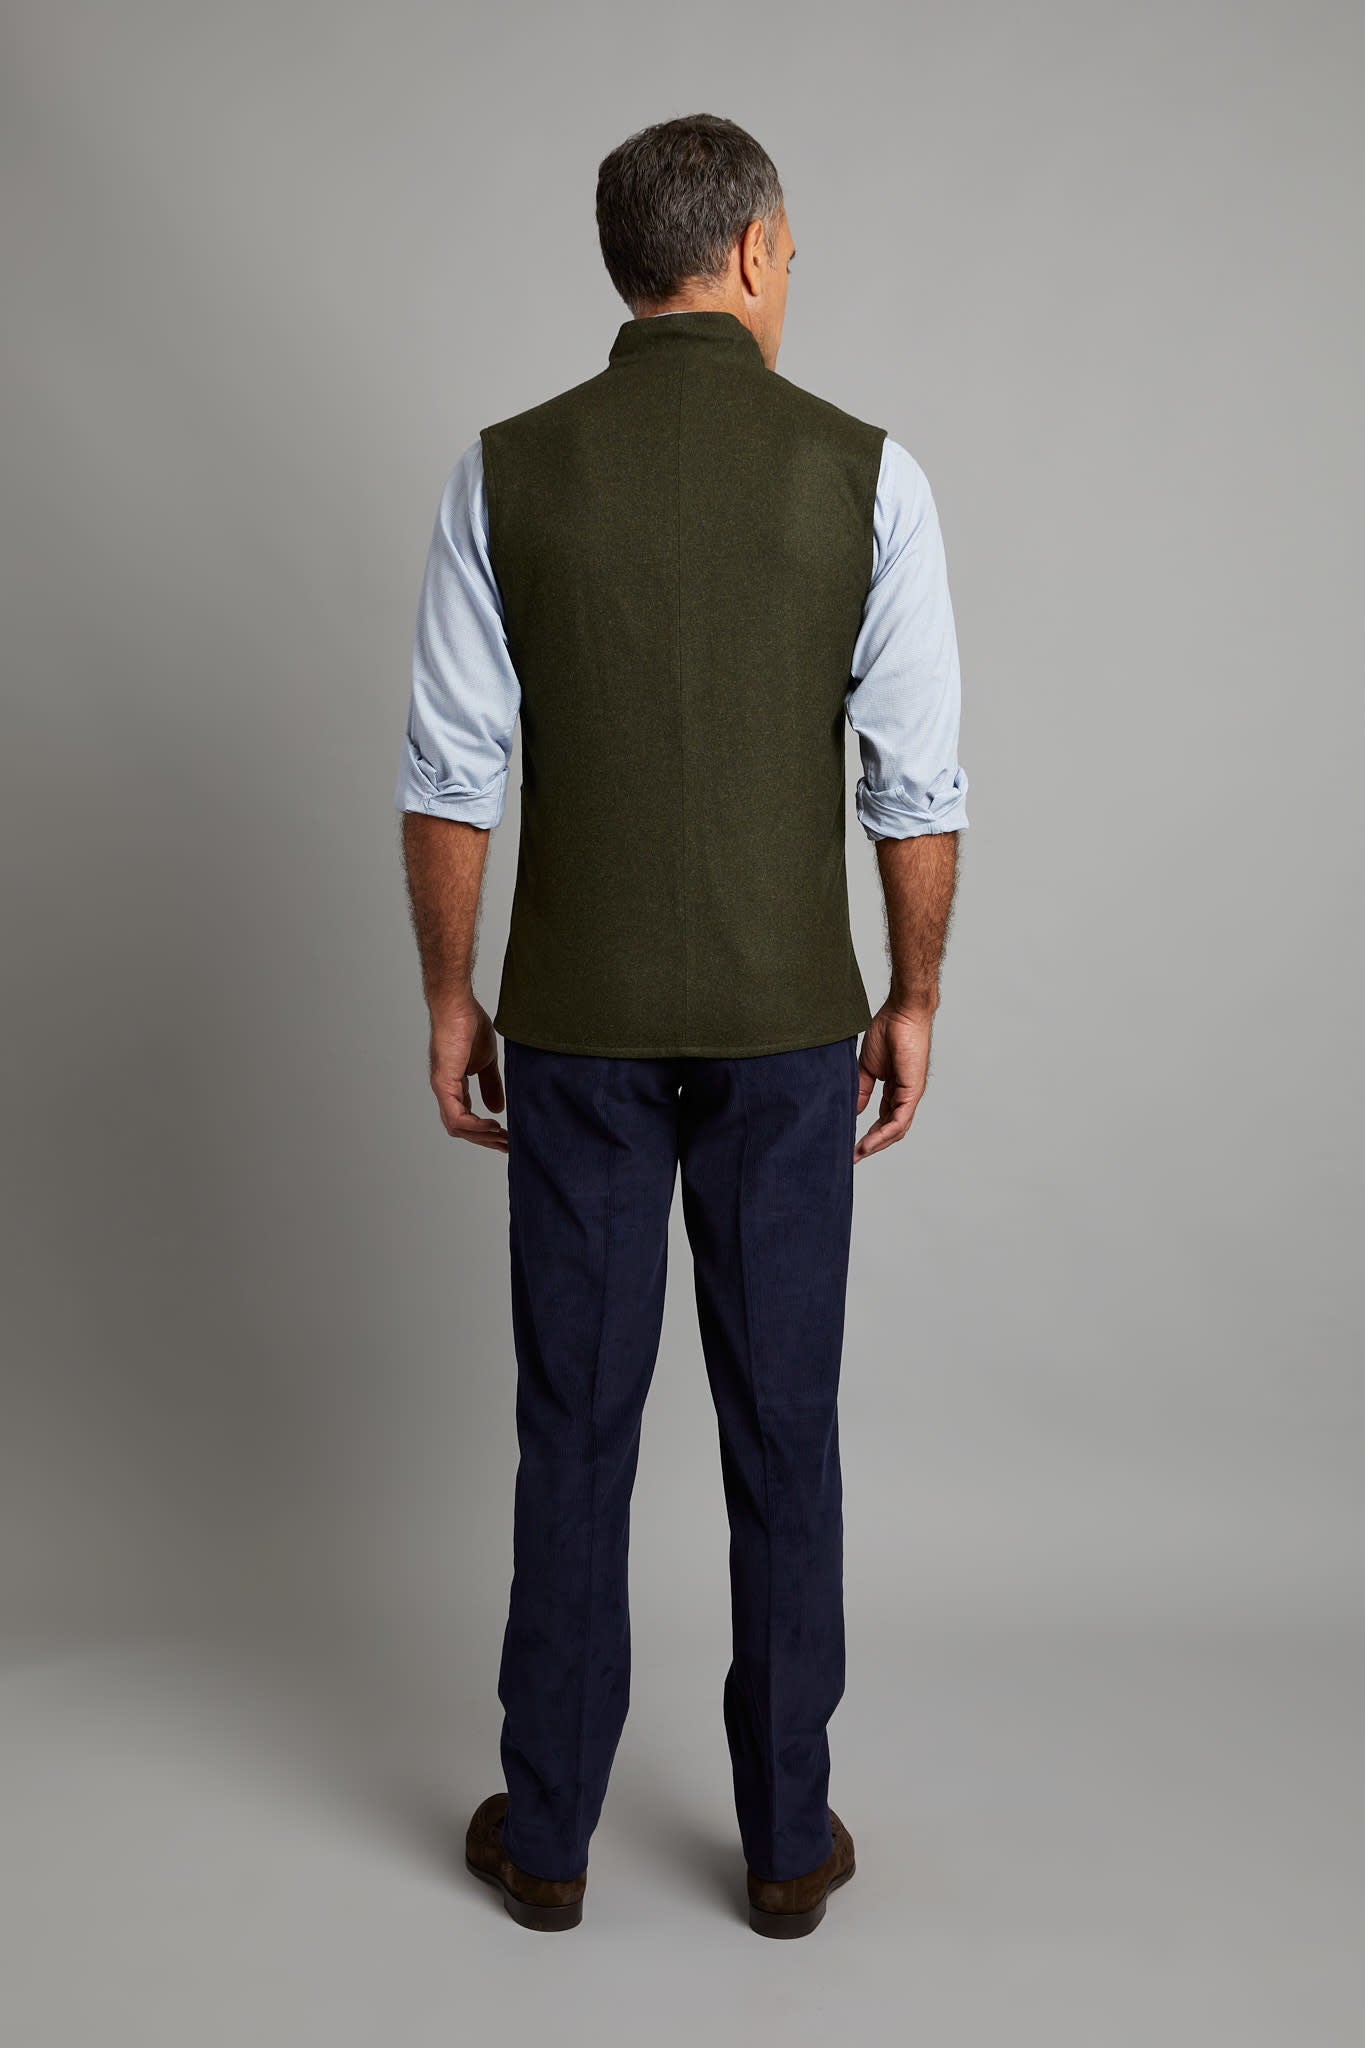 Reversible Gilet - Navy and Green Loden